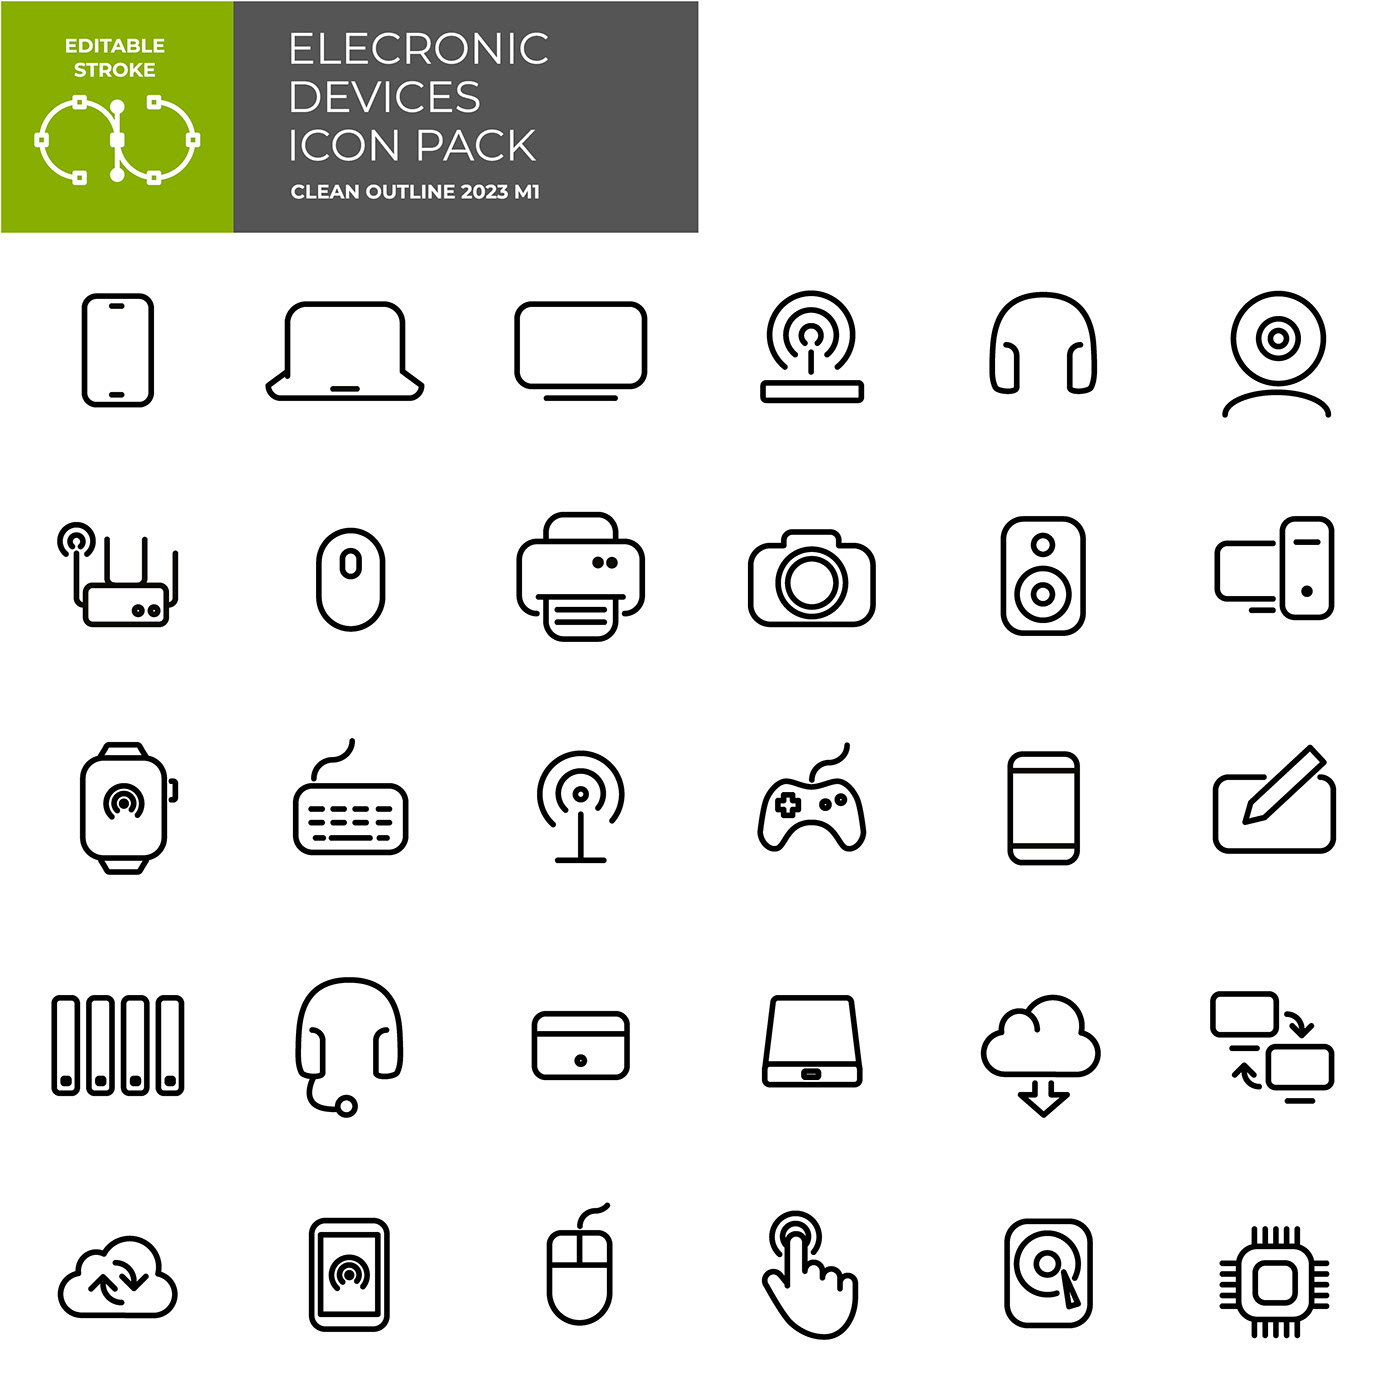 Icon outline electronic device vector editable icon set icons stroke icons